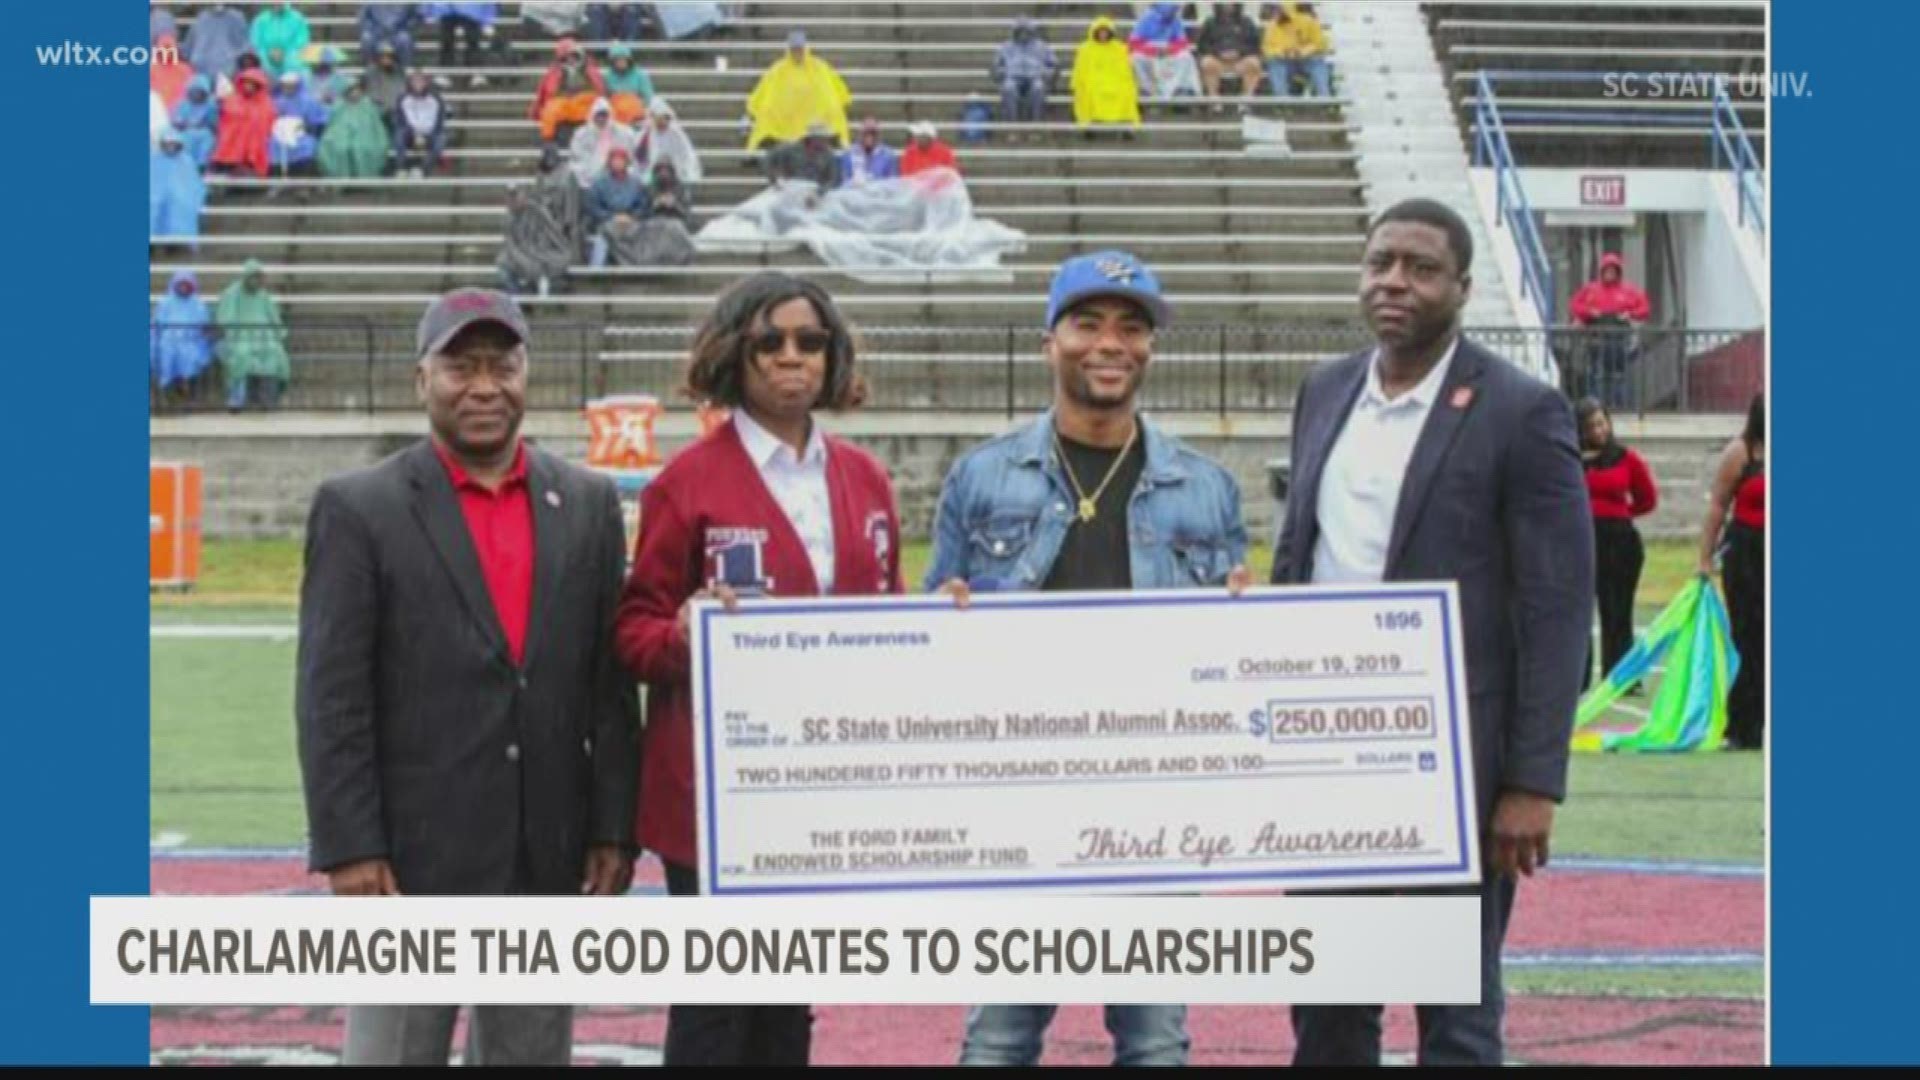 Charlamagne Tha God has donated a quarter of a million dollars to SC State University.